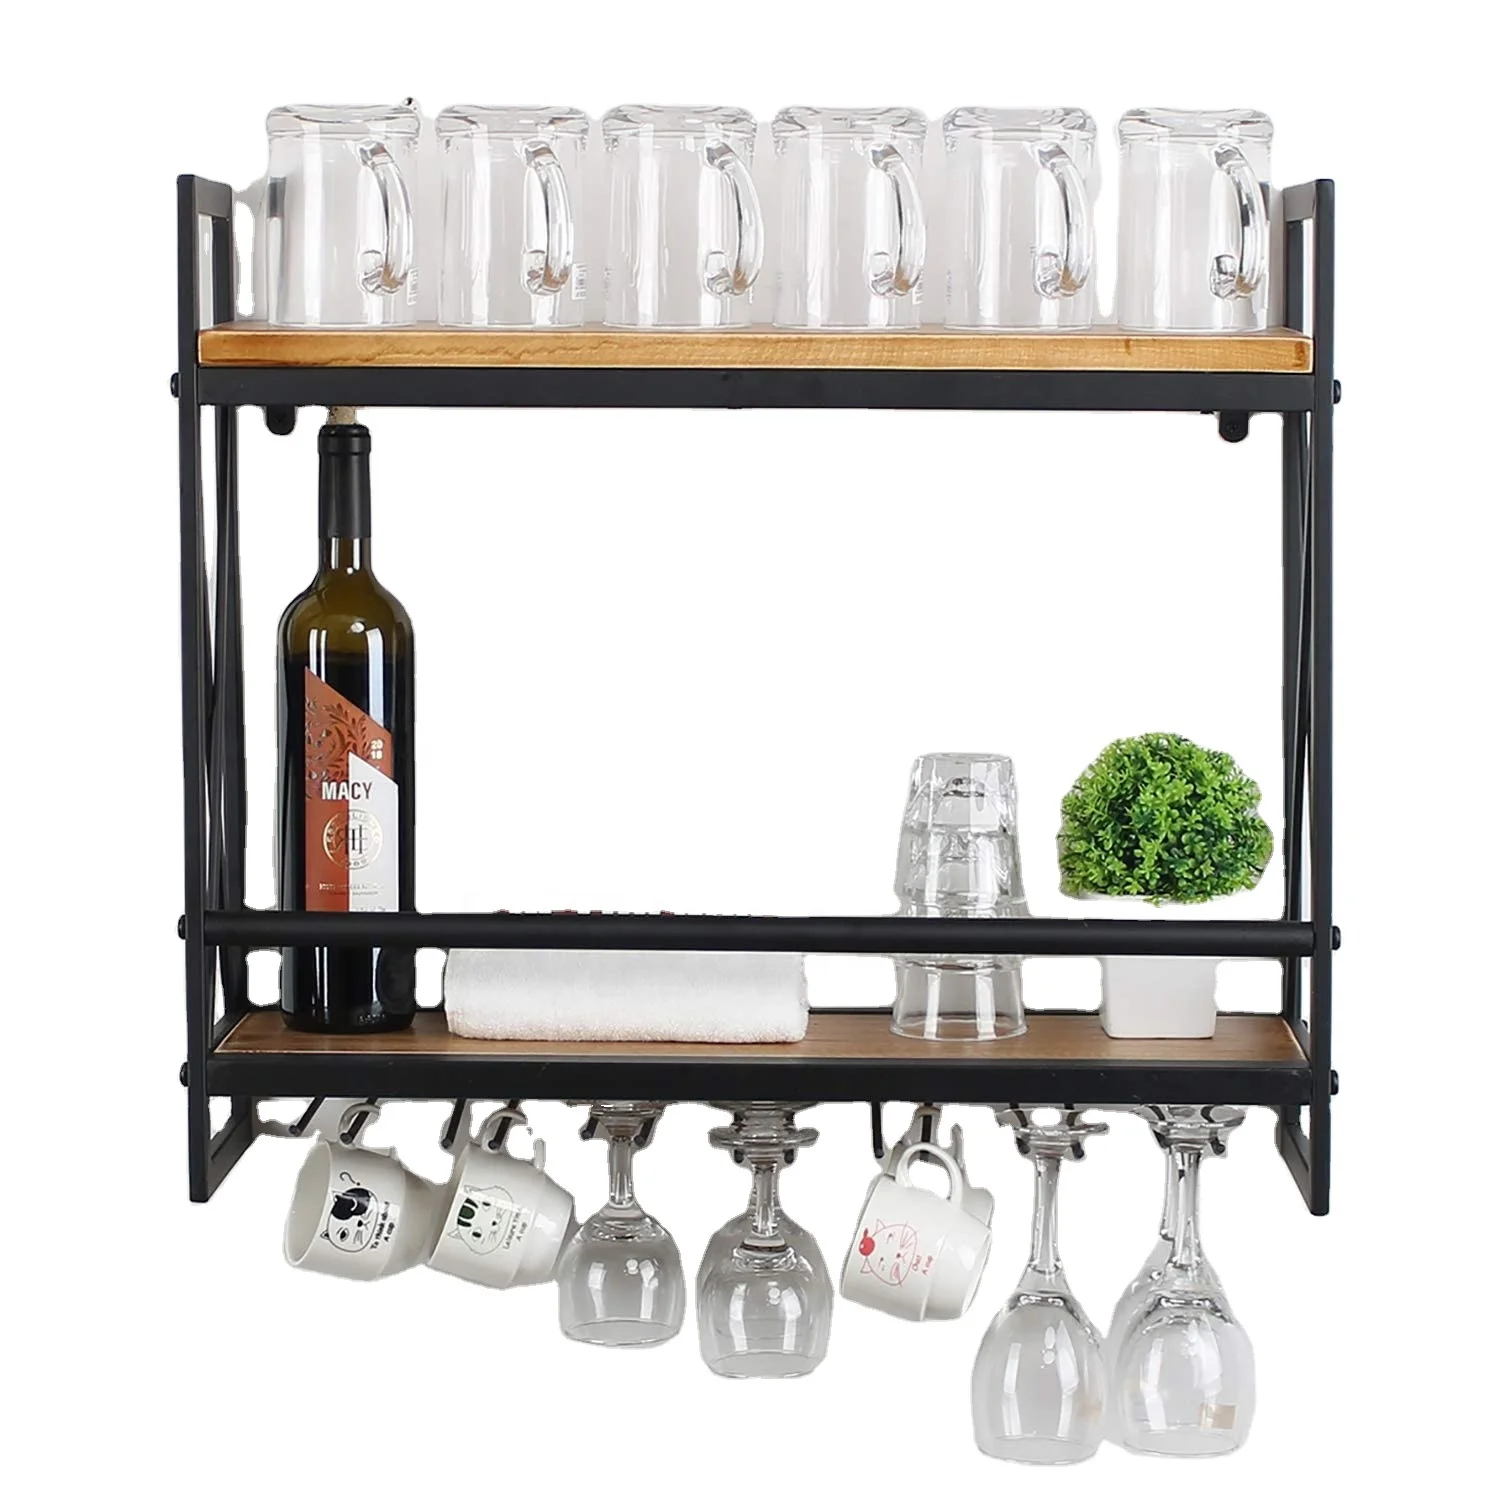 Industrial Wall Mounted Wine Racks with 4 Stem Glass Holder,24in Rustic Metal Hanging Wine Holder Glass Rack,2-Tiers Floating Bar Shelves Bottle Holder Storage Shelves,Wood Shelves Wall Shelf 